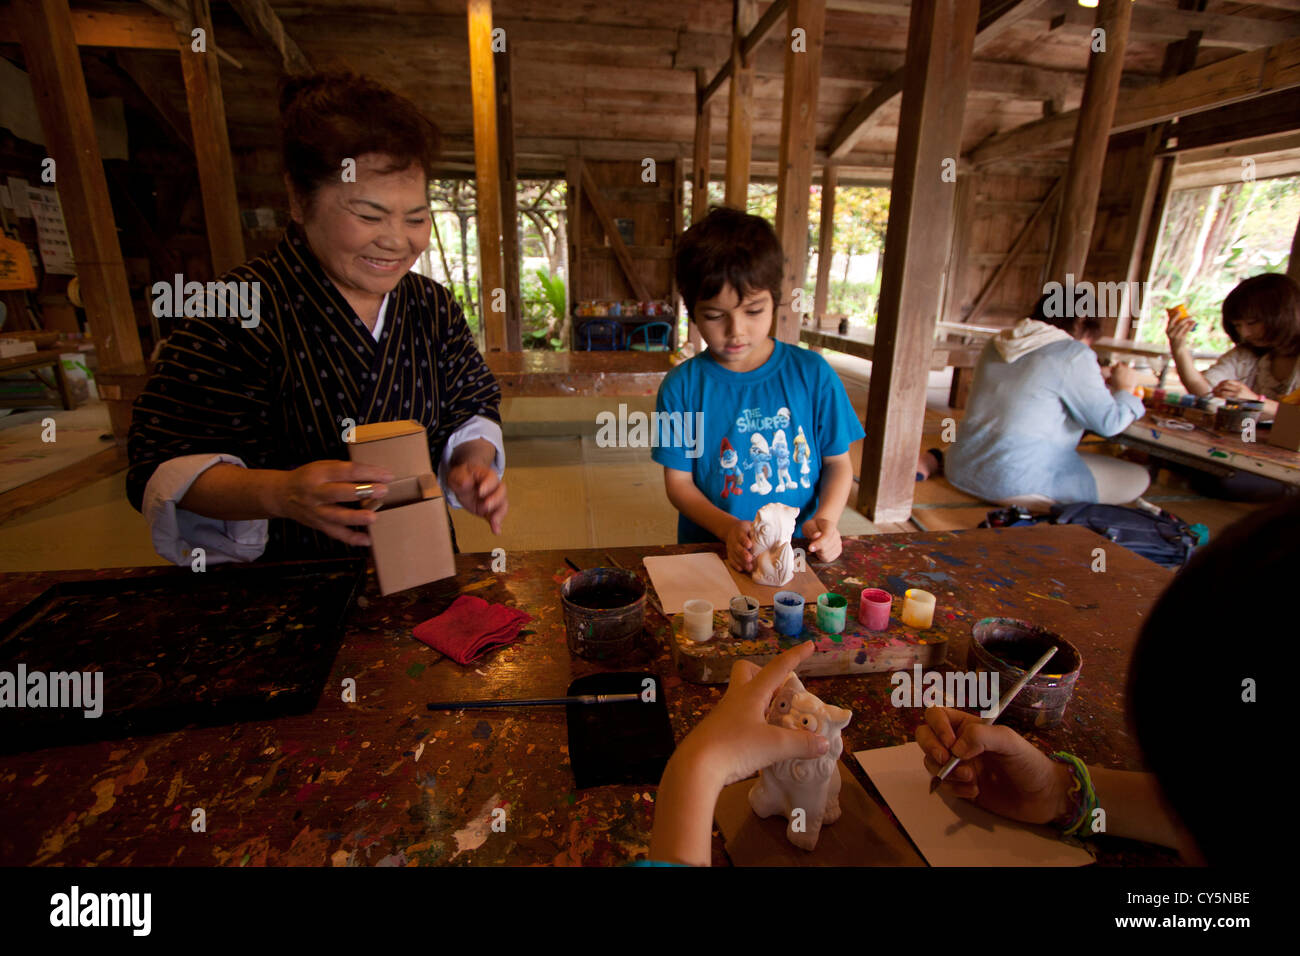 A worker at the Ryukyu Village on the main island of Okinawa, Japan helps two young boys paint pottery Shiisa - lion god statues Stock Photo